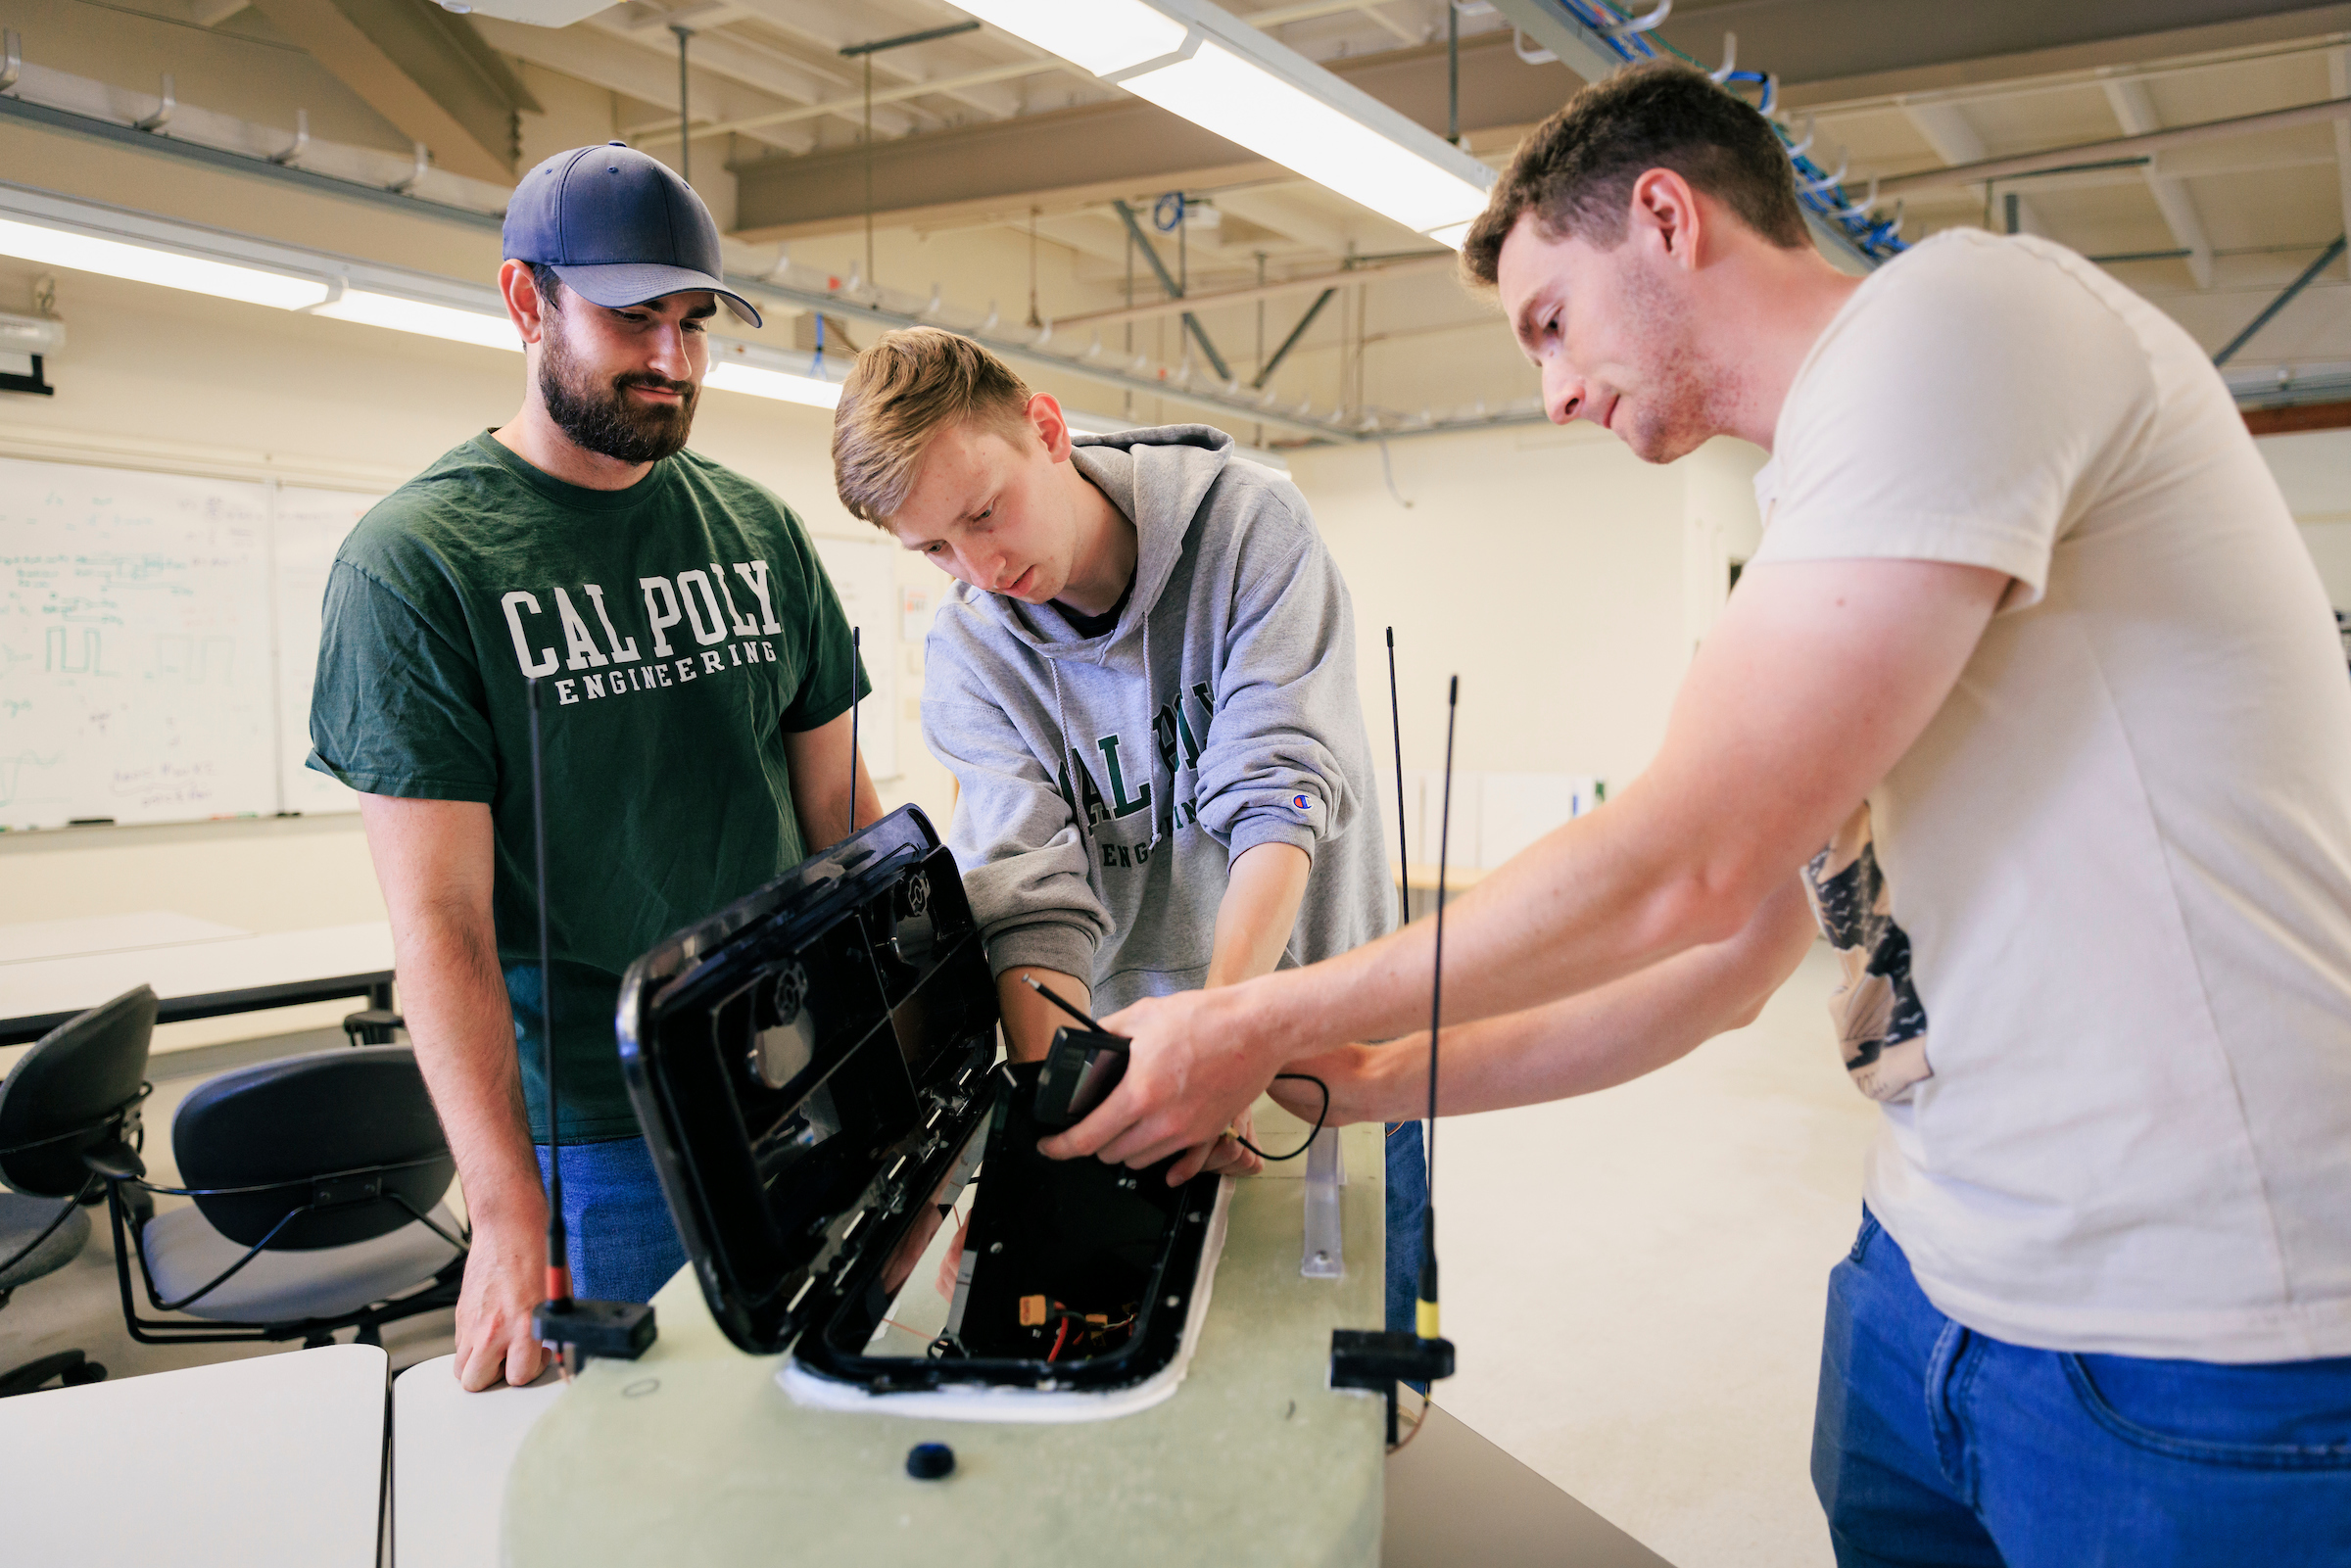 Three students work on the autonomous rescue vehicle, which looks like a small boat, in a lab at Cal Poly.